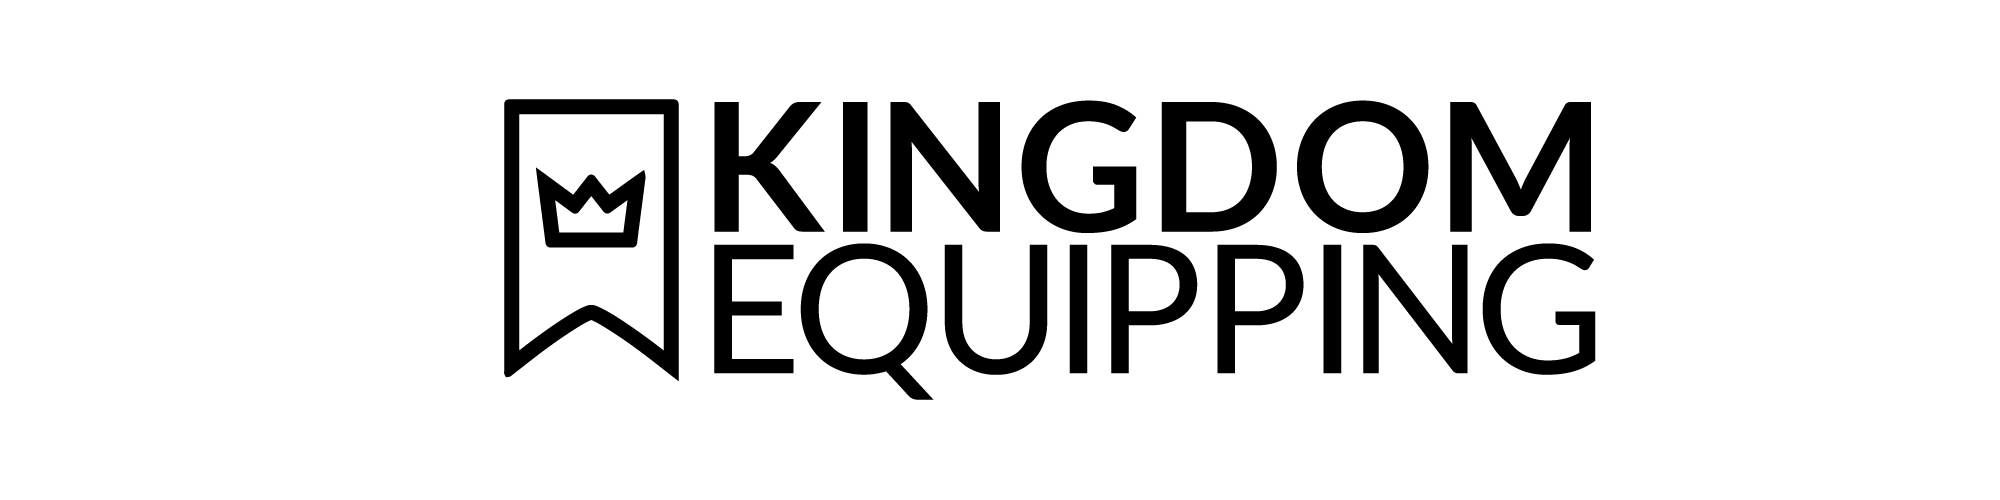 MESSAGES CHANNEL | Kingdom Equipping